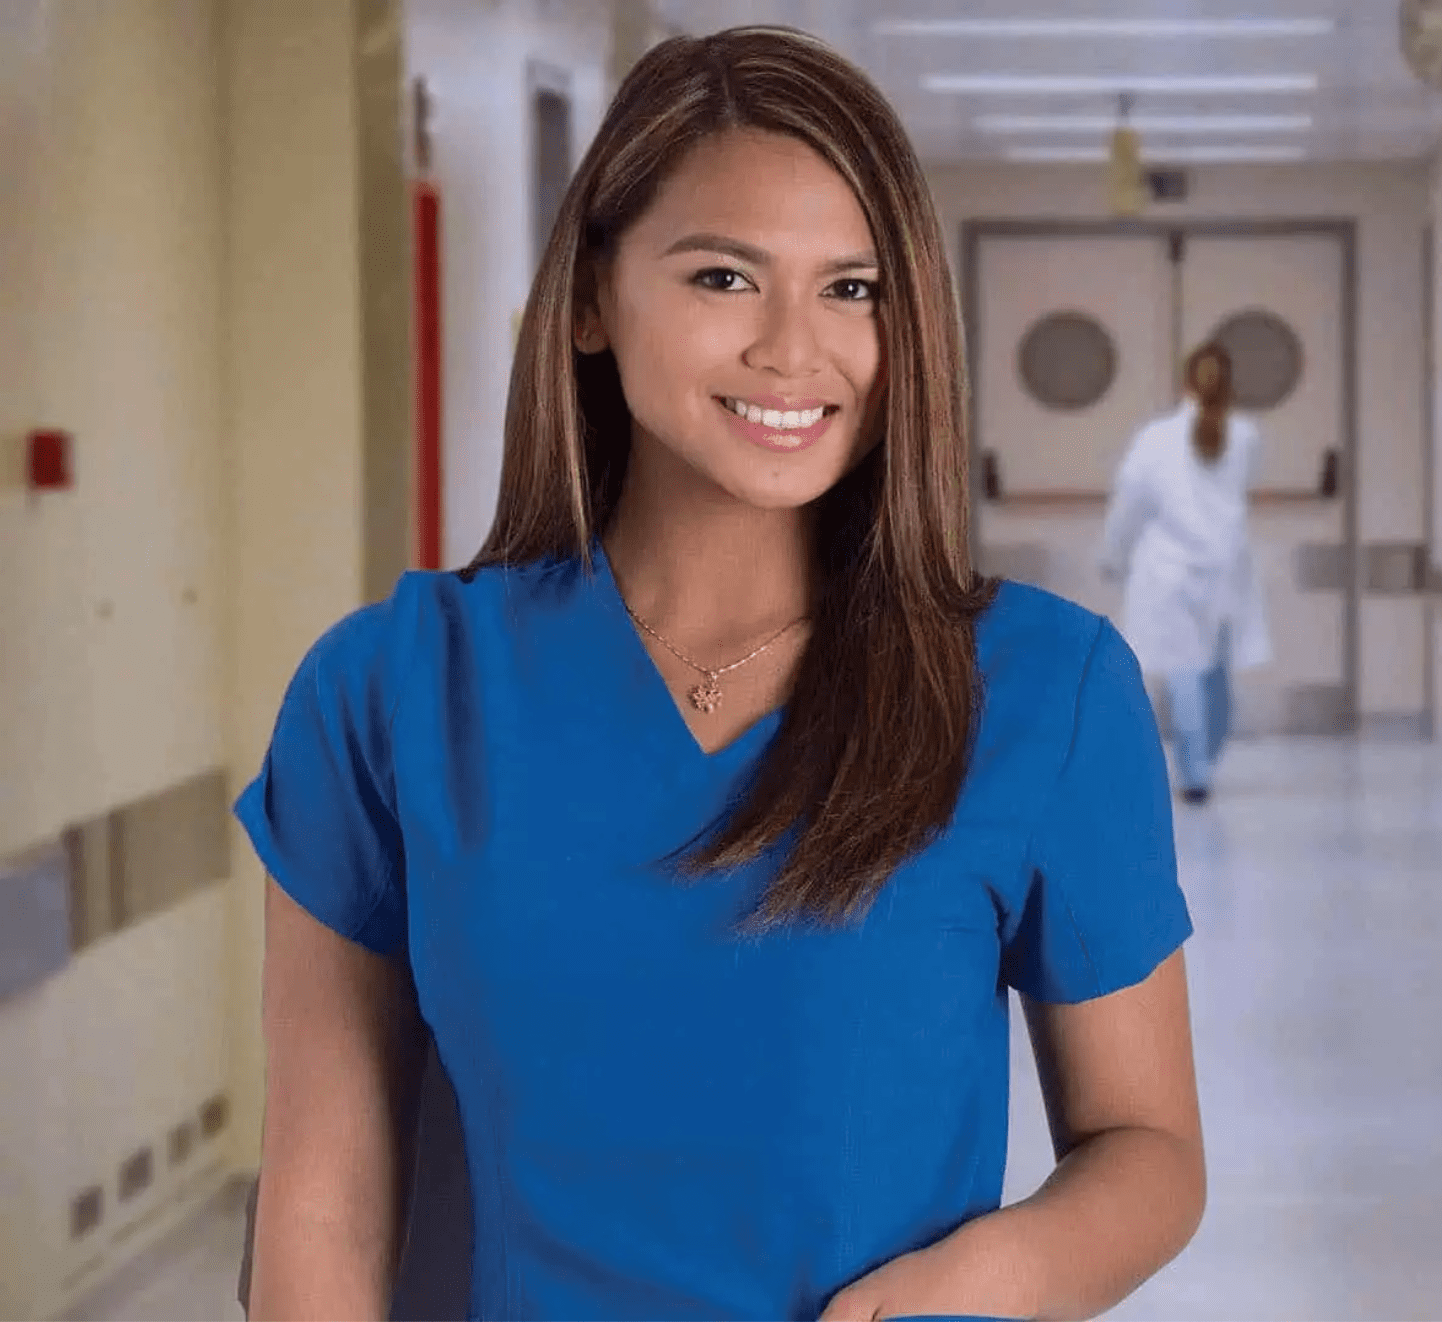 Asian female wearing blue scrubs and smiing